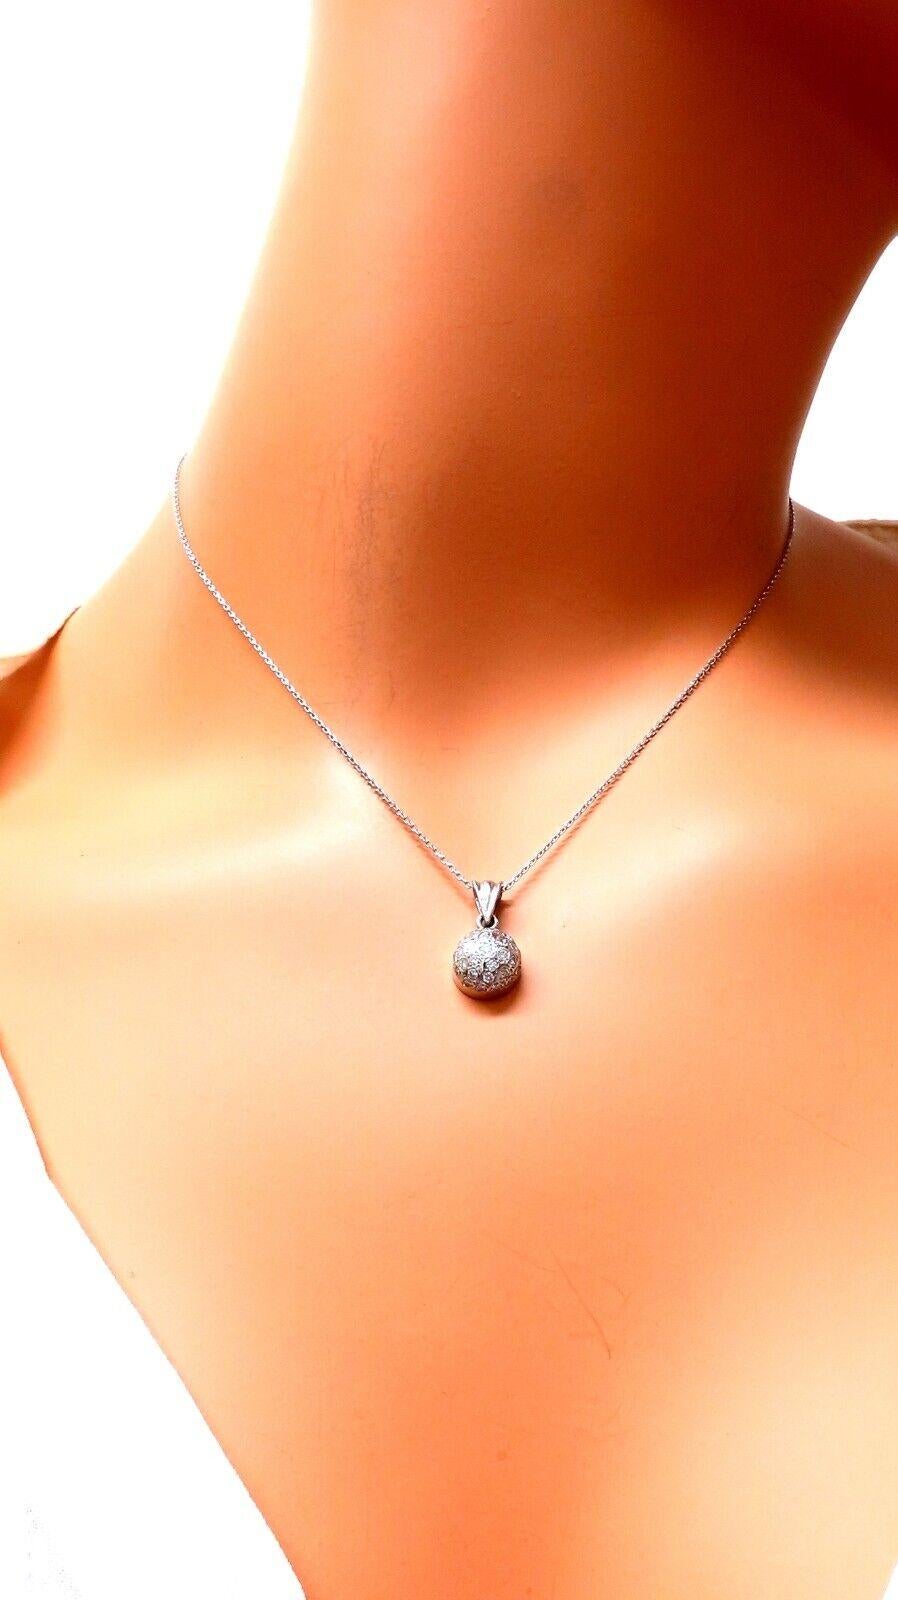 Circle Necklace 

Natural Diamonds: .75ct. Vs-2 clarity, G-color

14kt. White gold & Necklace of 16 inches

9mm ball 

3.5 grams.

The 14kt. necklace is included